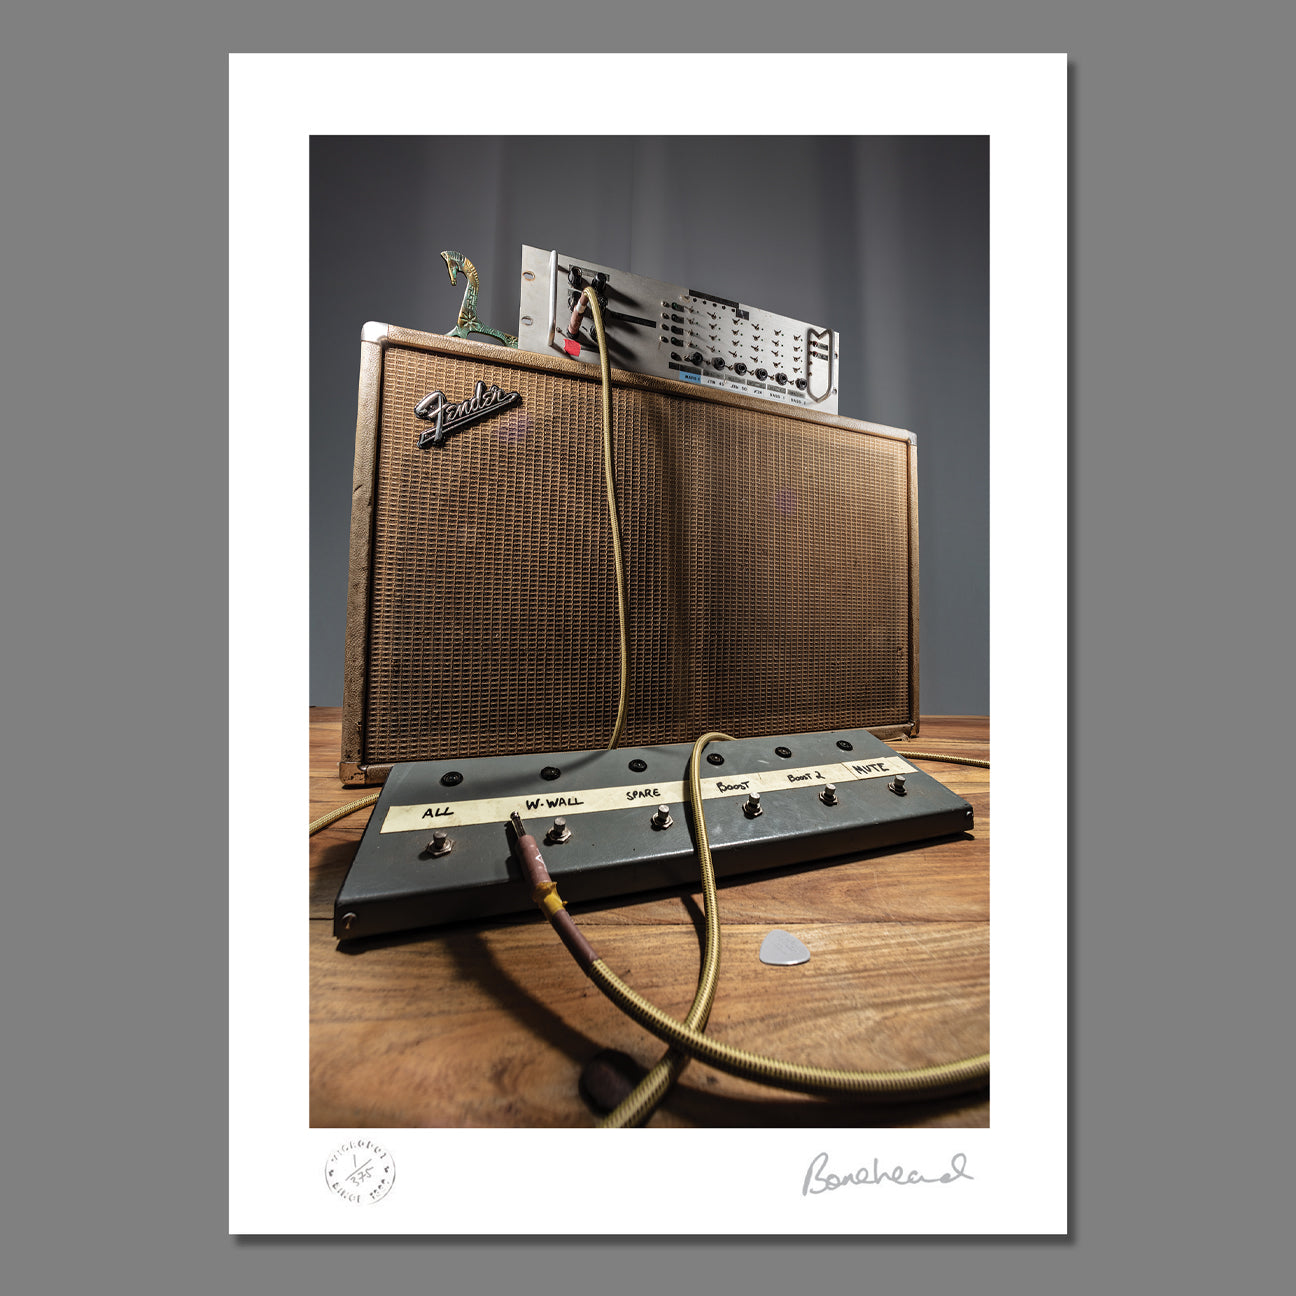 Bonehead Signed Wall Of Sound Limited Edition Print